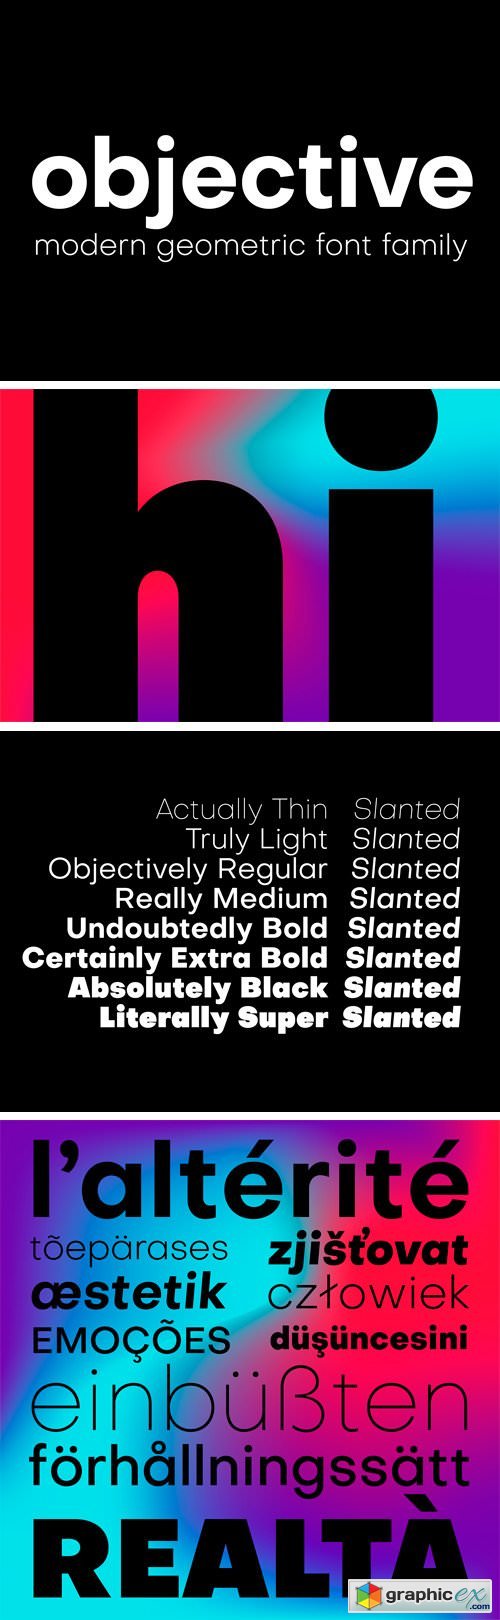 Objective Font Family